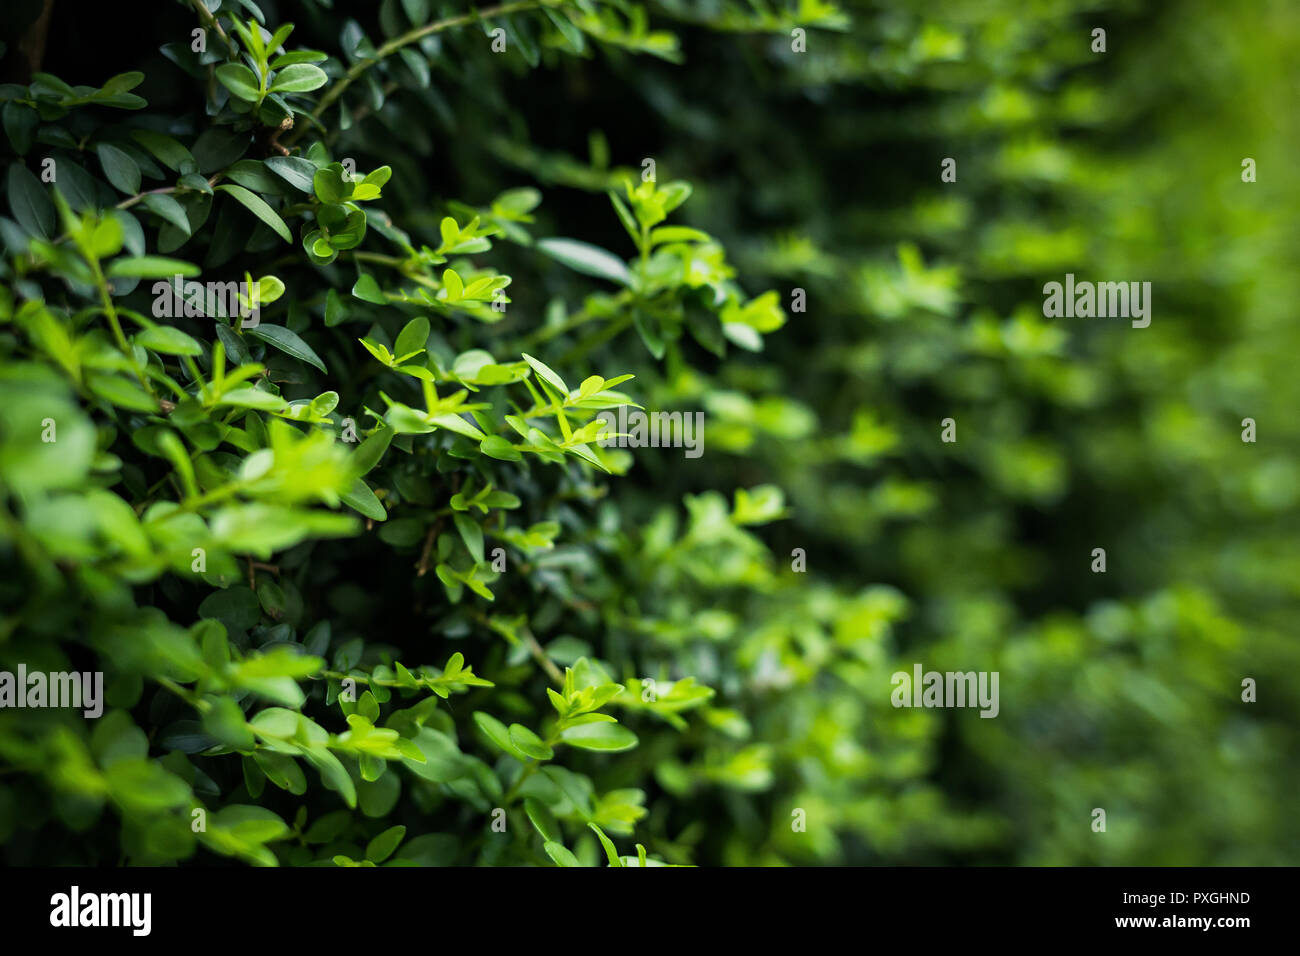 Green Leaves background. Green leaf pattern background, Natural background/ Stock Photo